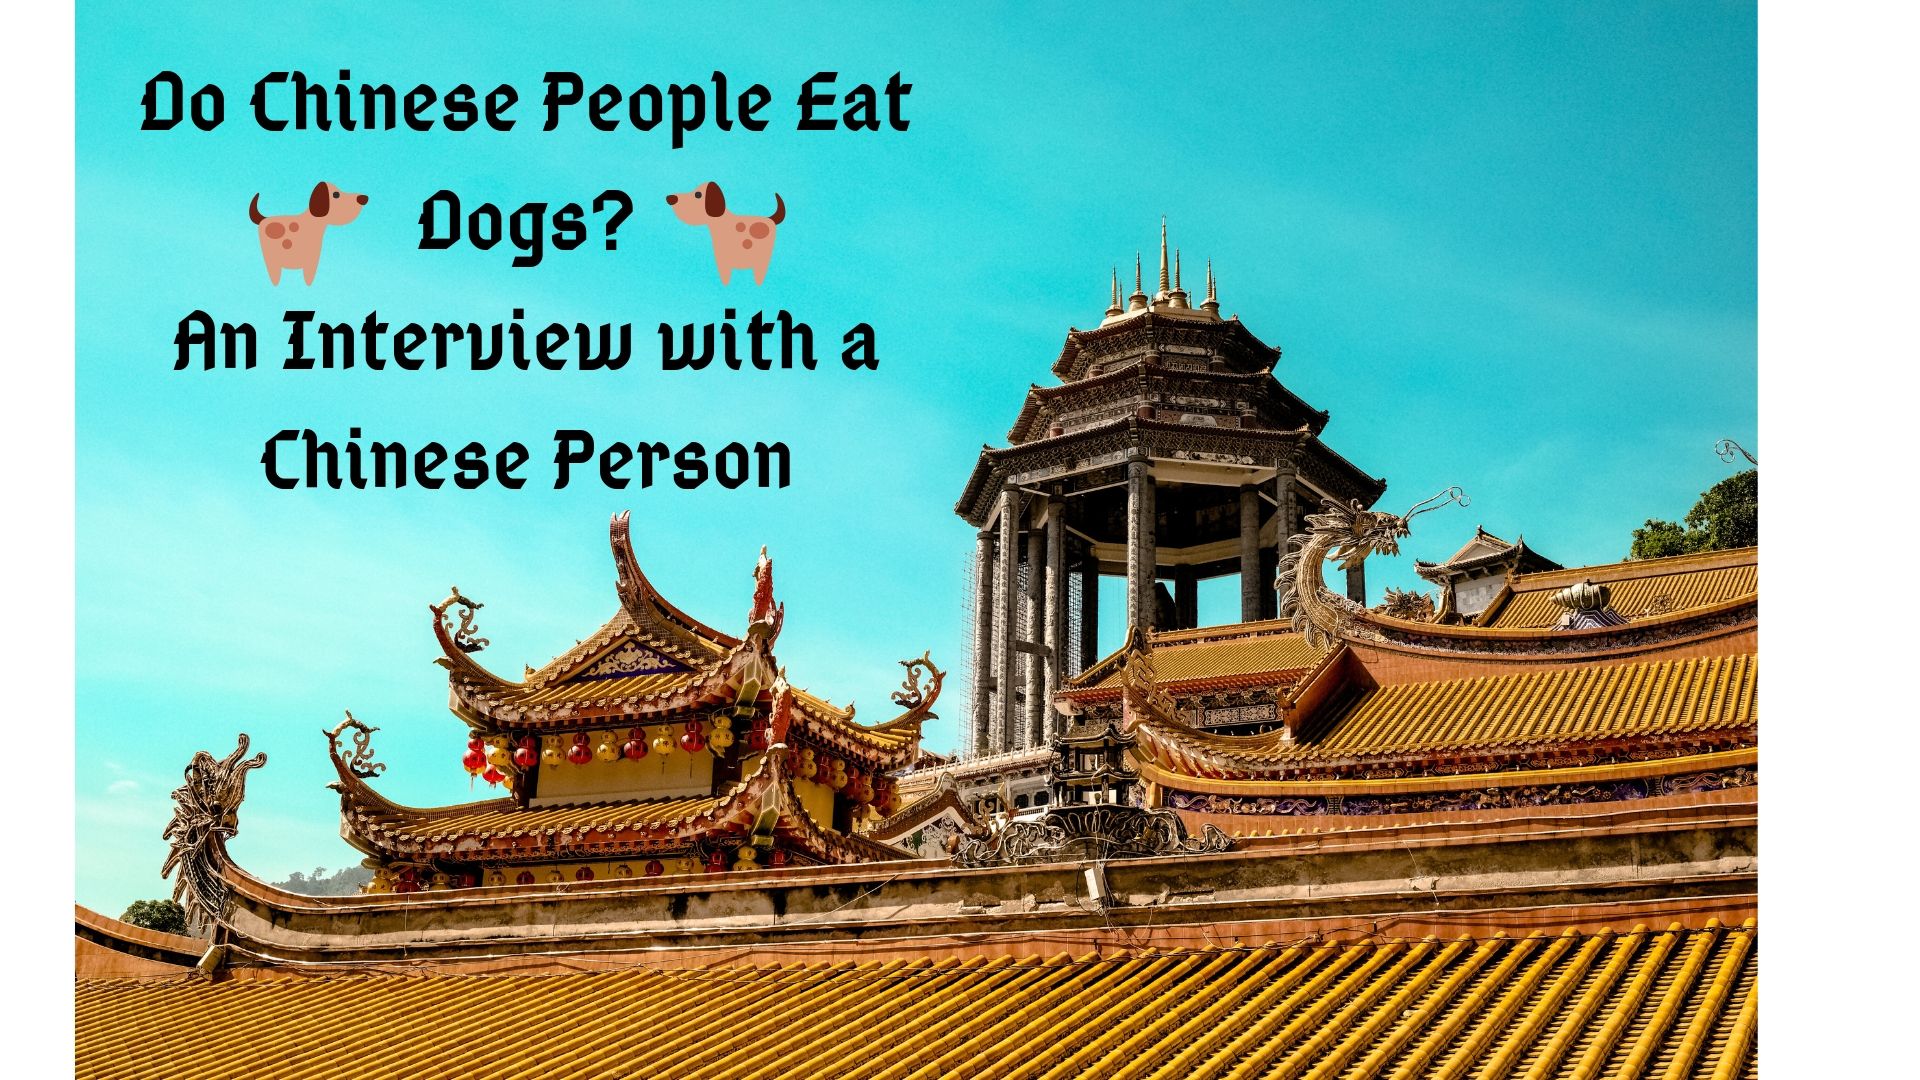 do Chinese people eat dogs